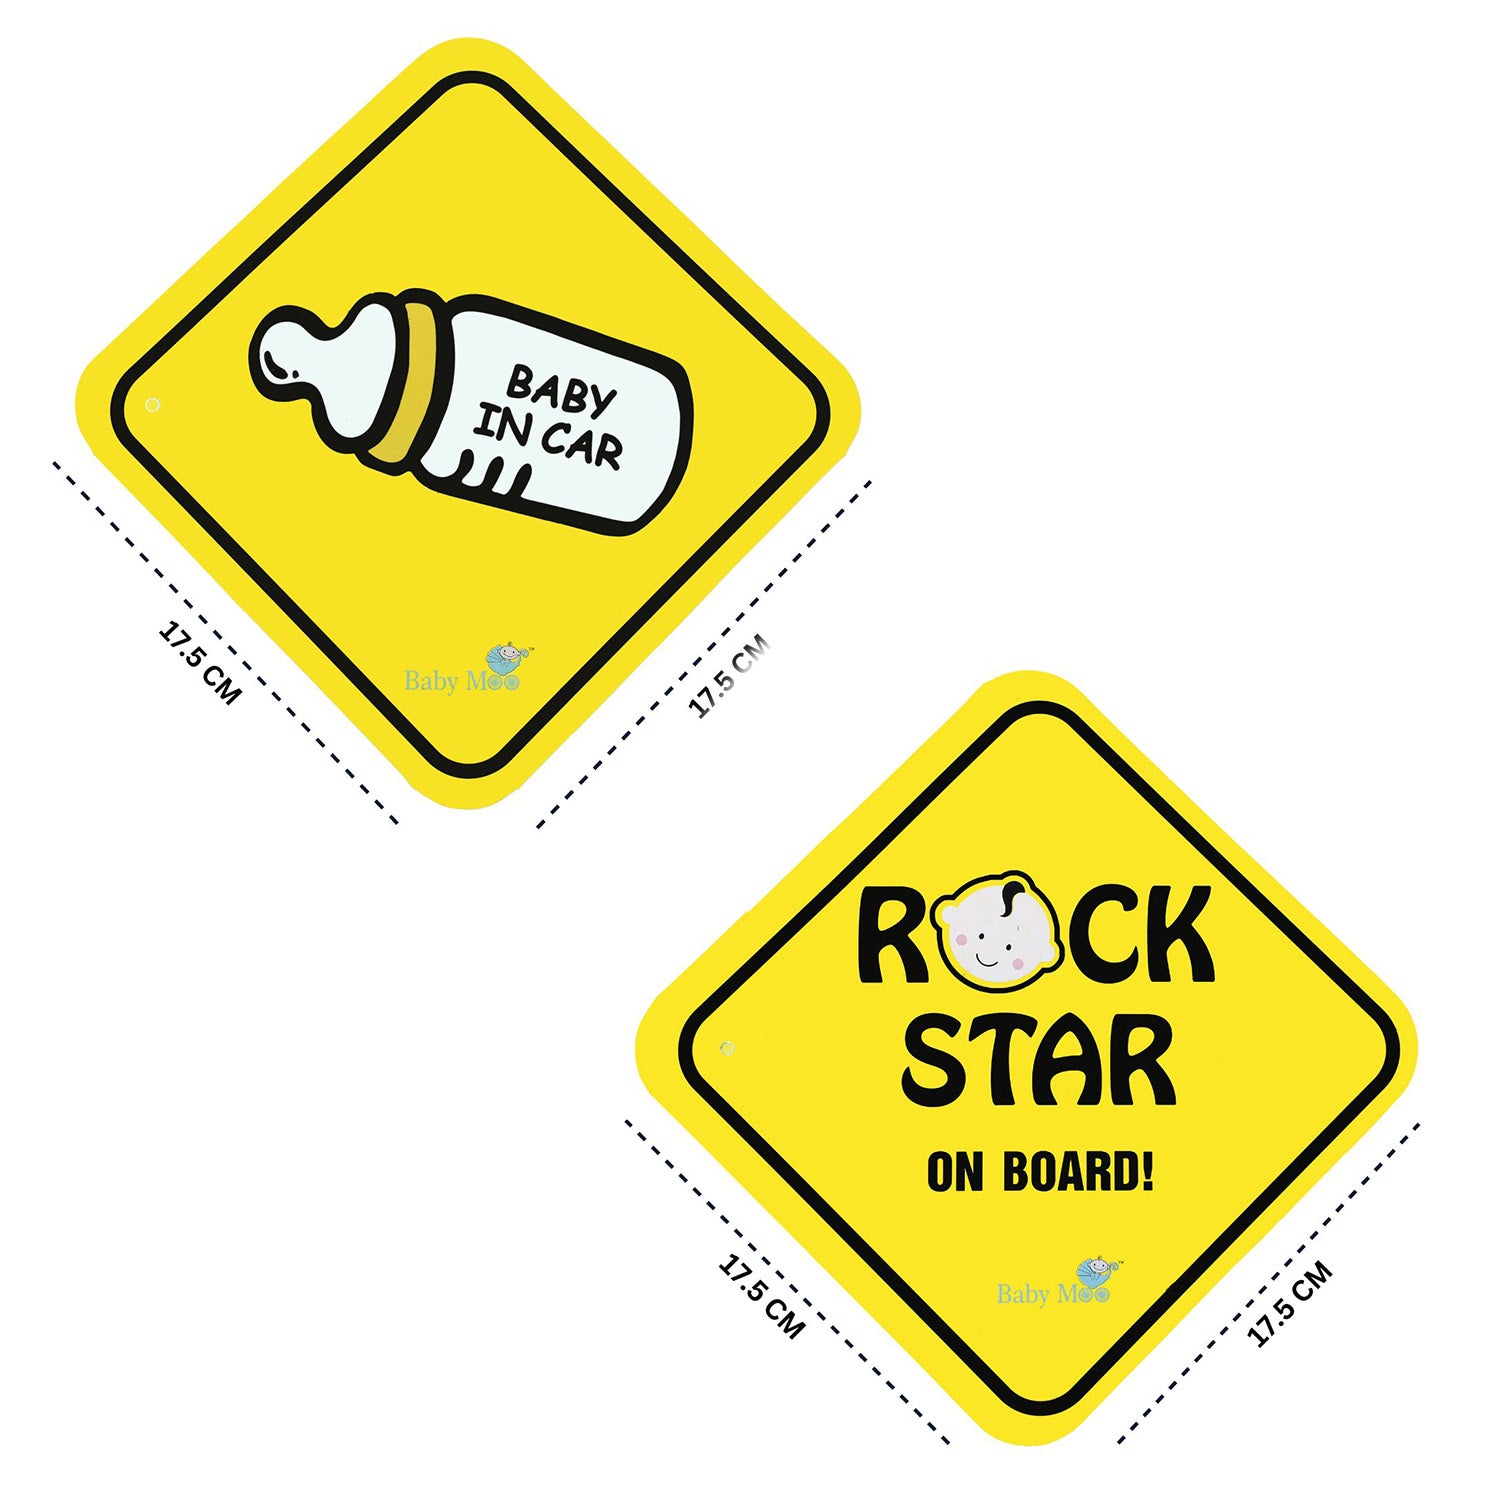 Baby Moo Car Safety Sign Rockstar Baby On Board With Suction Cup Clip 2 Pack - Yellow - Baby Moo